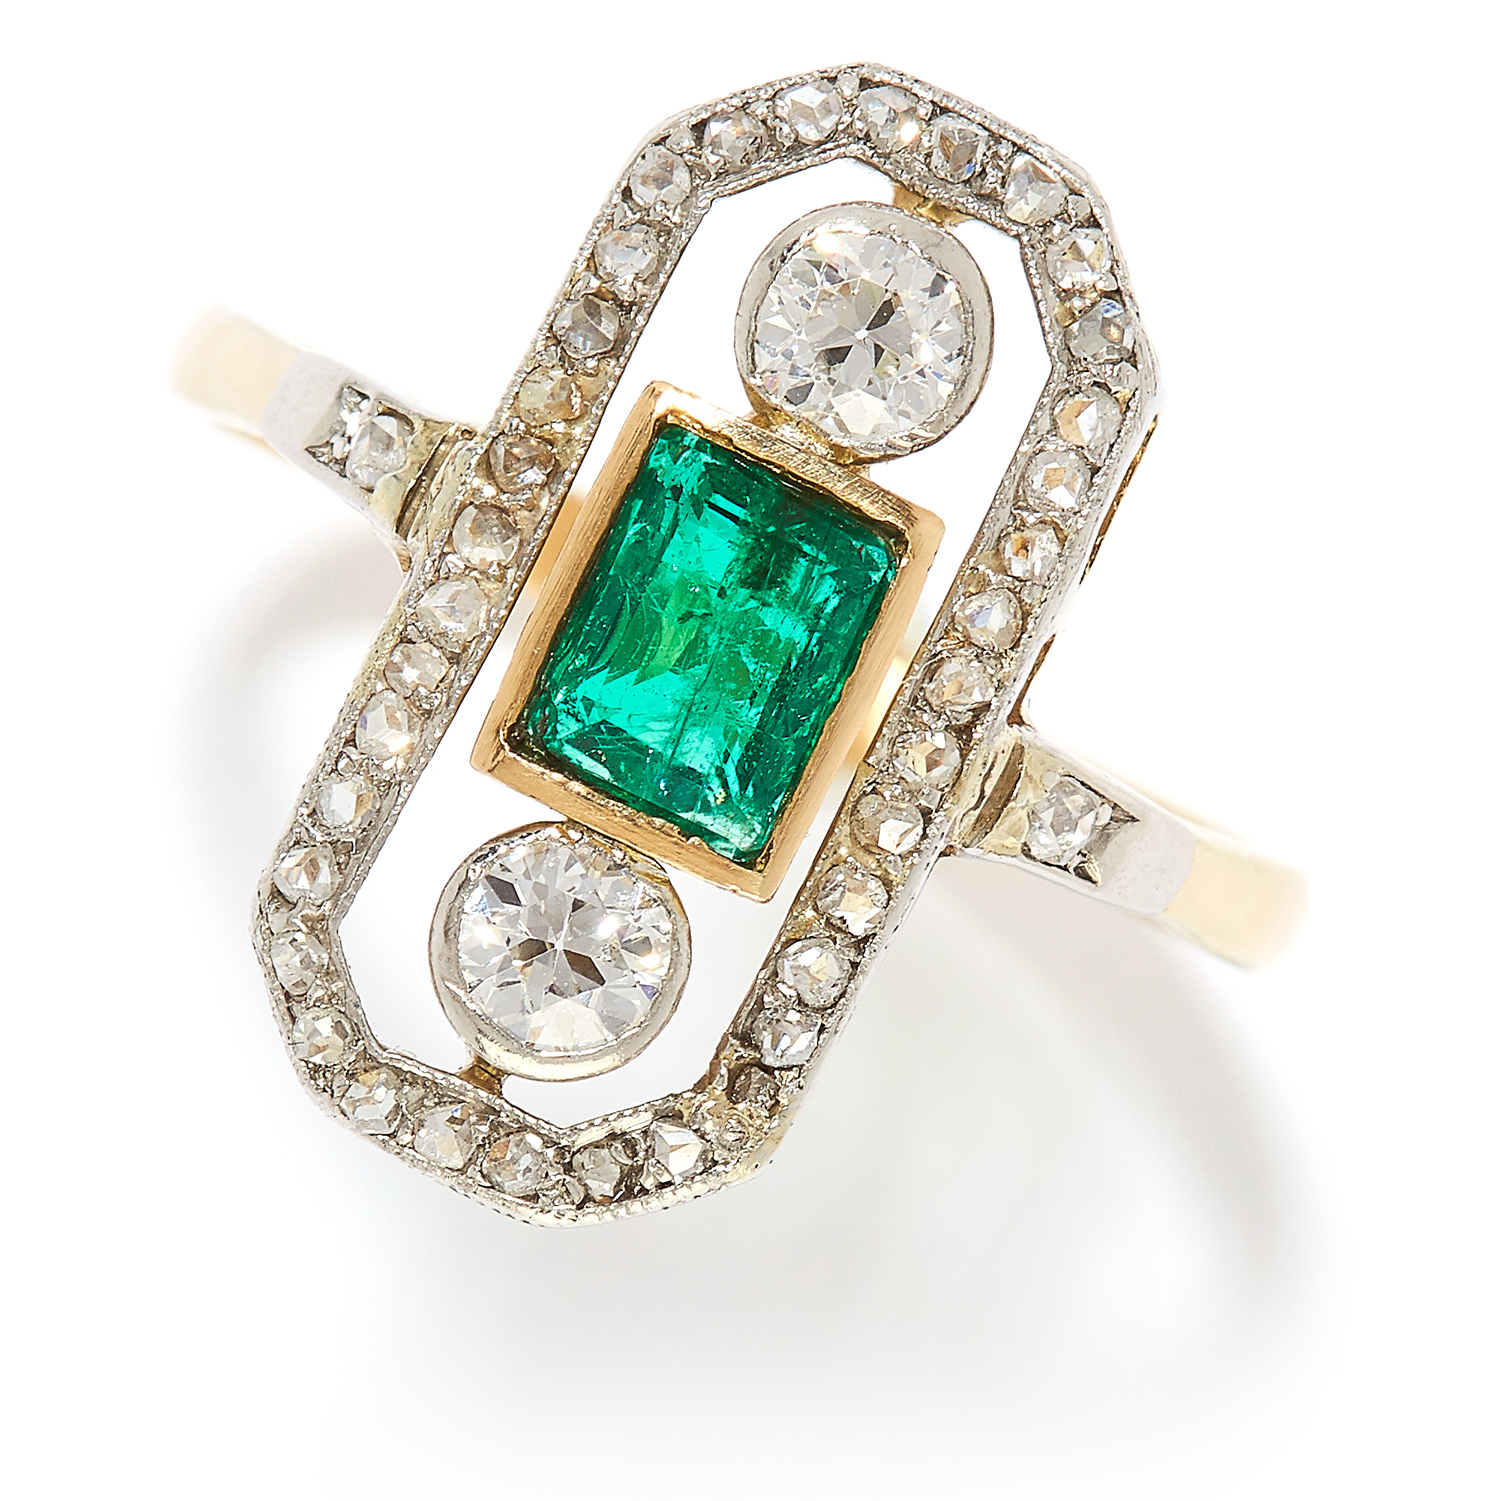 ANTIQUE EMERALD AND DIAMOND RING in yellow gold, set with an emerald cut emerald of approximately